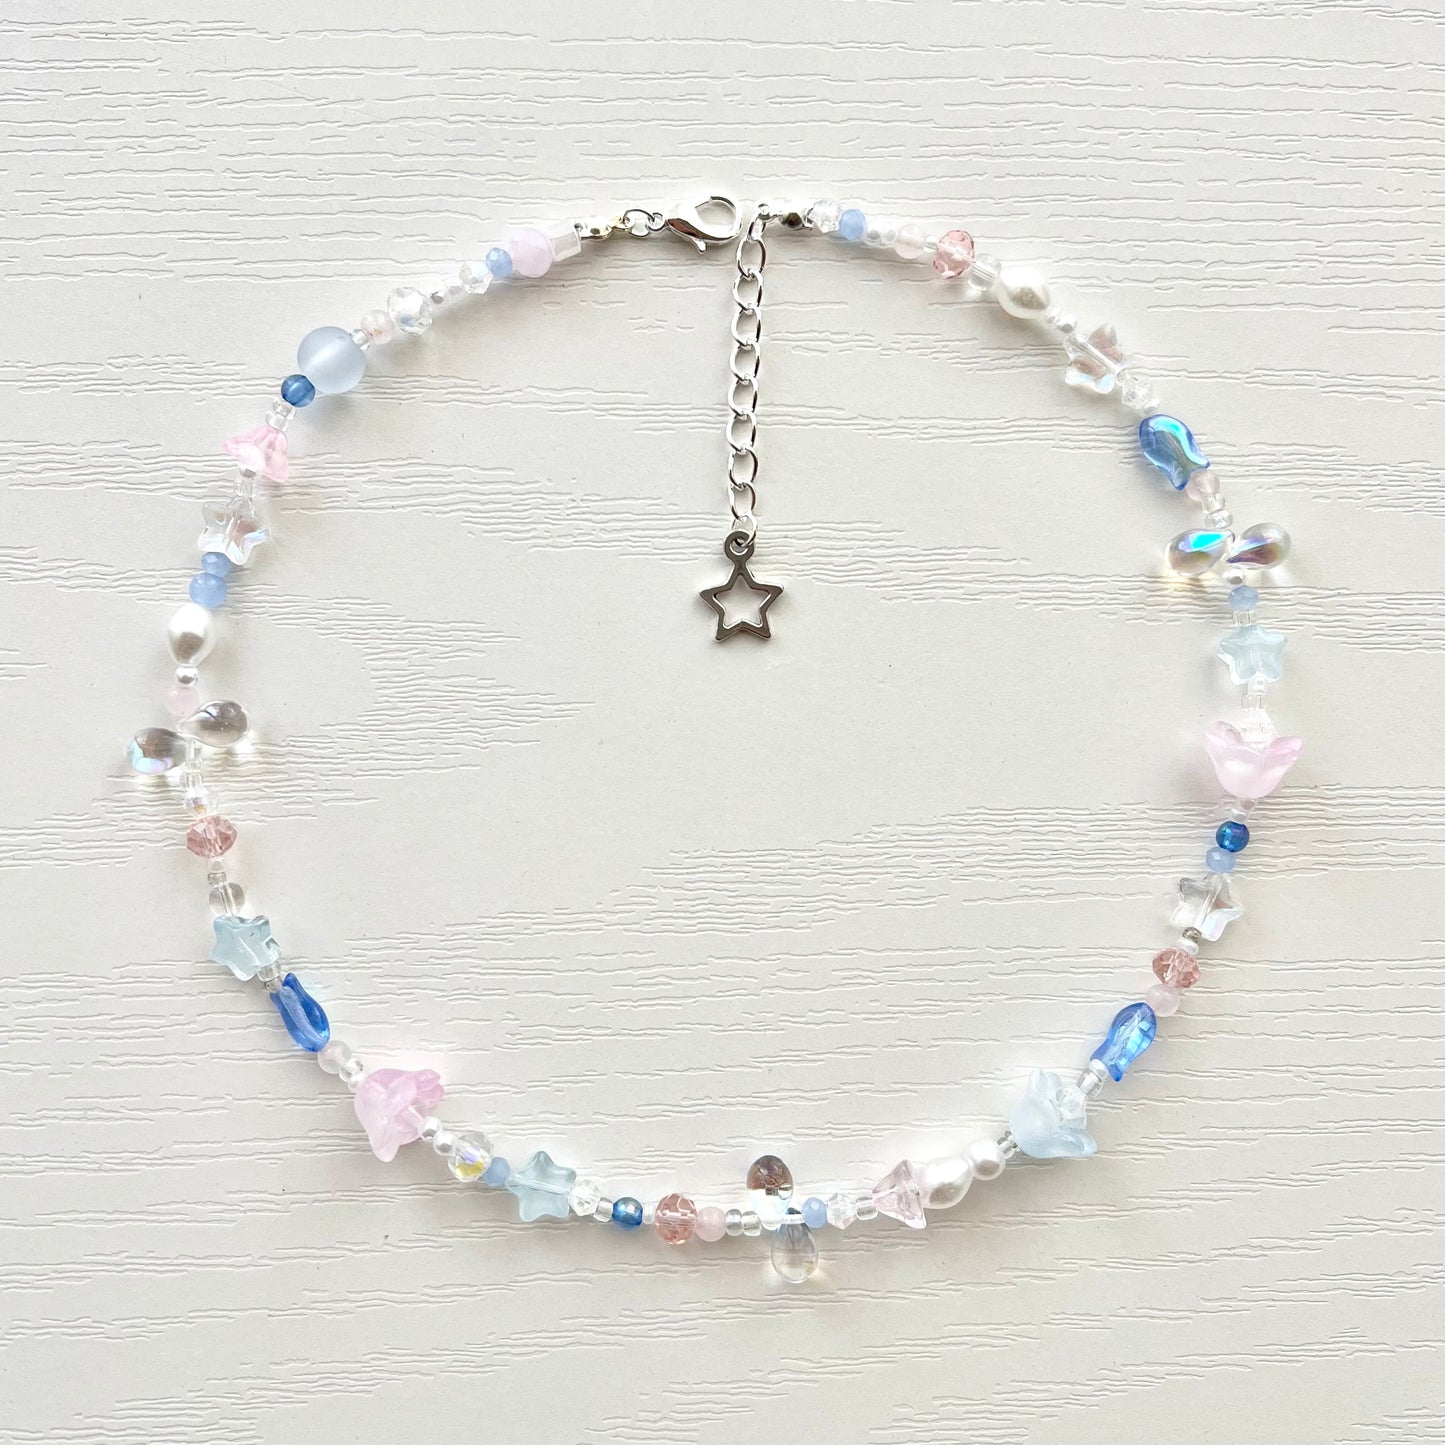 'lover' TS necklace